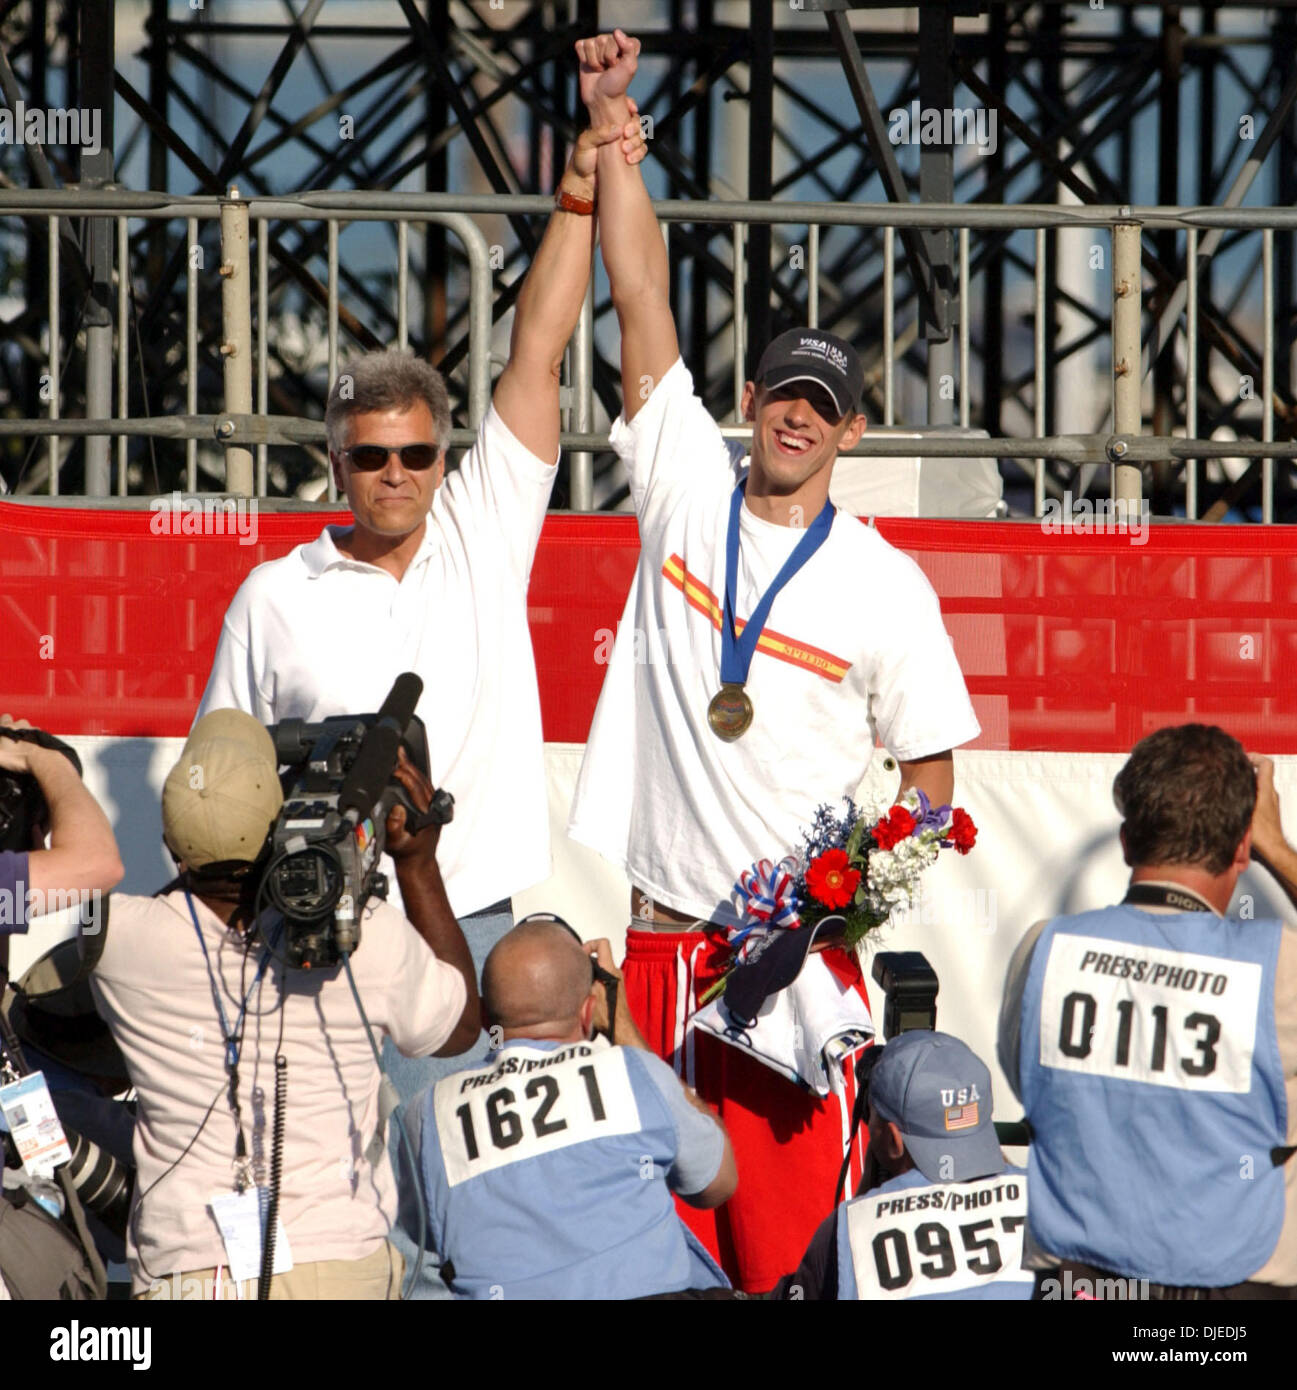 7-time Gold Medal champion Mark Spitz met Michael Phelps for the first time Saturday July 10, 2004 at the U.S. Olympic Team Swim Trials in Long Beach, Calif and presented the rising swim star with his 1st place medal for the 200m Butterfly. (Contra Costa Times/Karl Mondon )/ZUMA Press Stock Photo